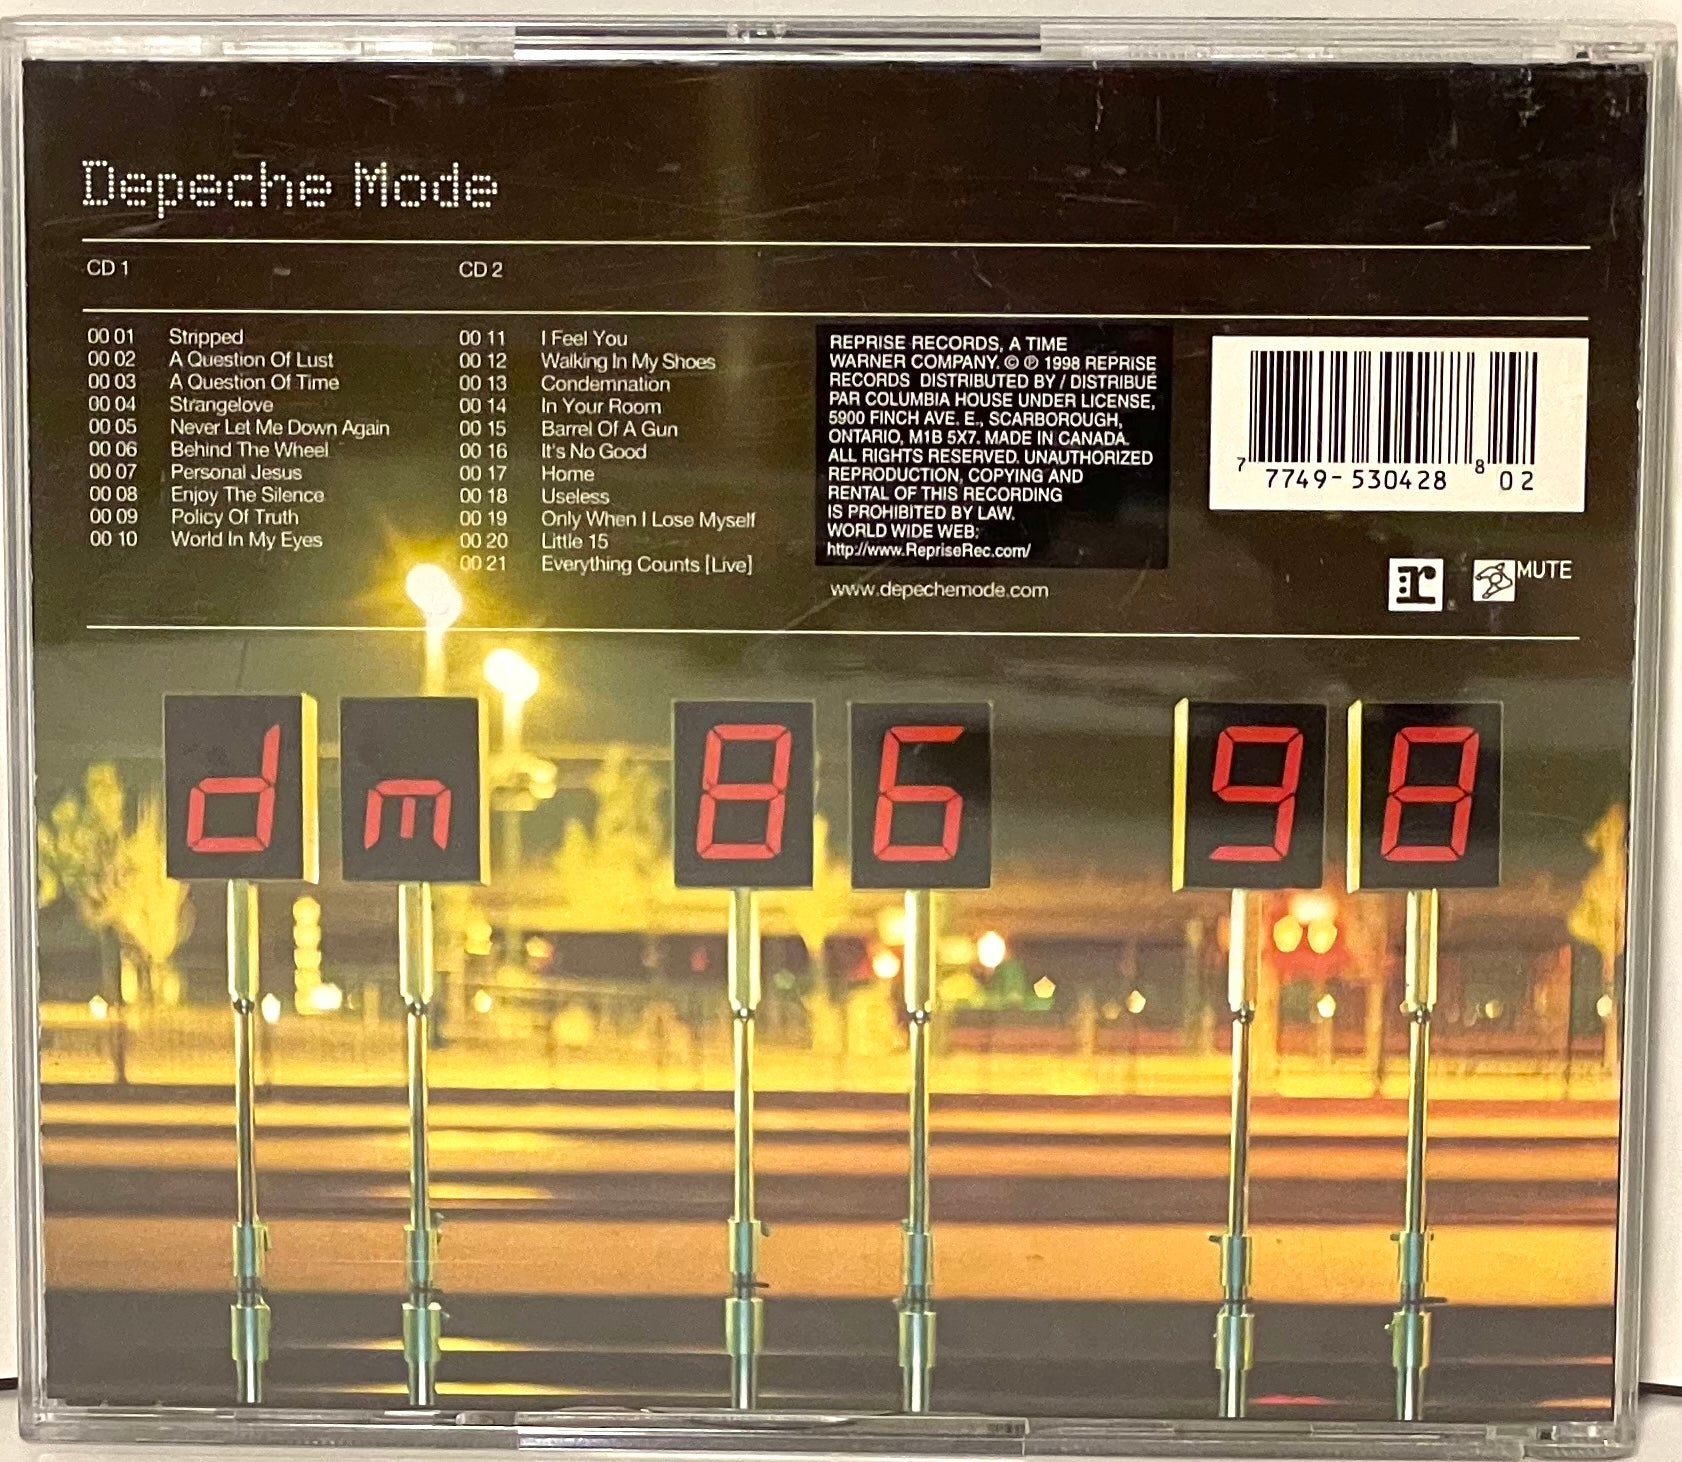 Depeche Mode - The Singles 86>98, Releases